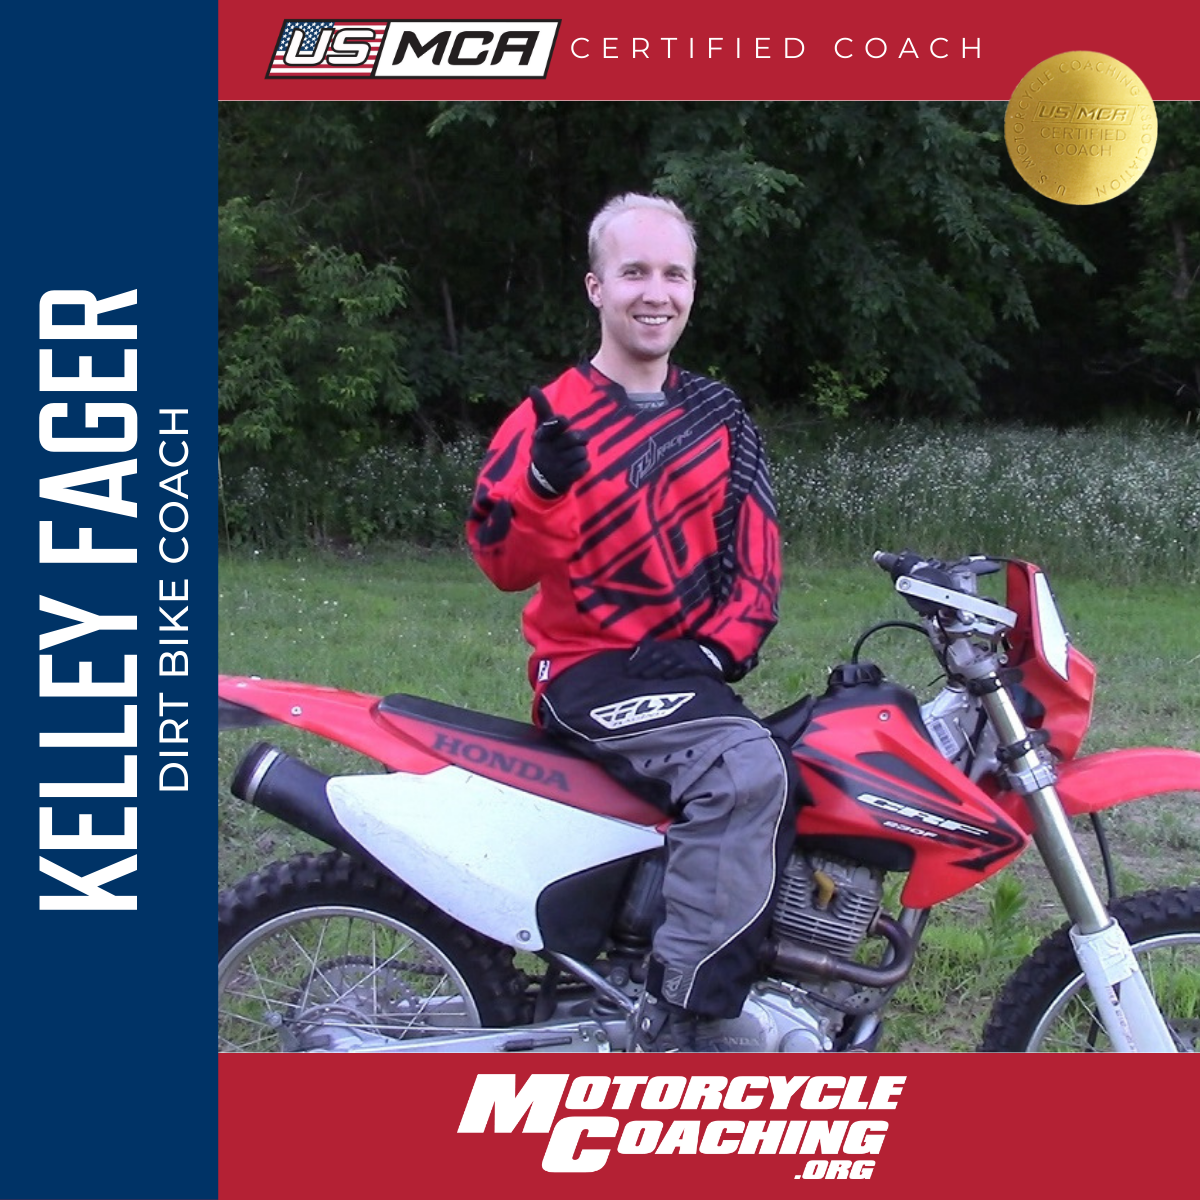 KELLEY FAGER USMCA certified coach About